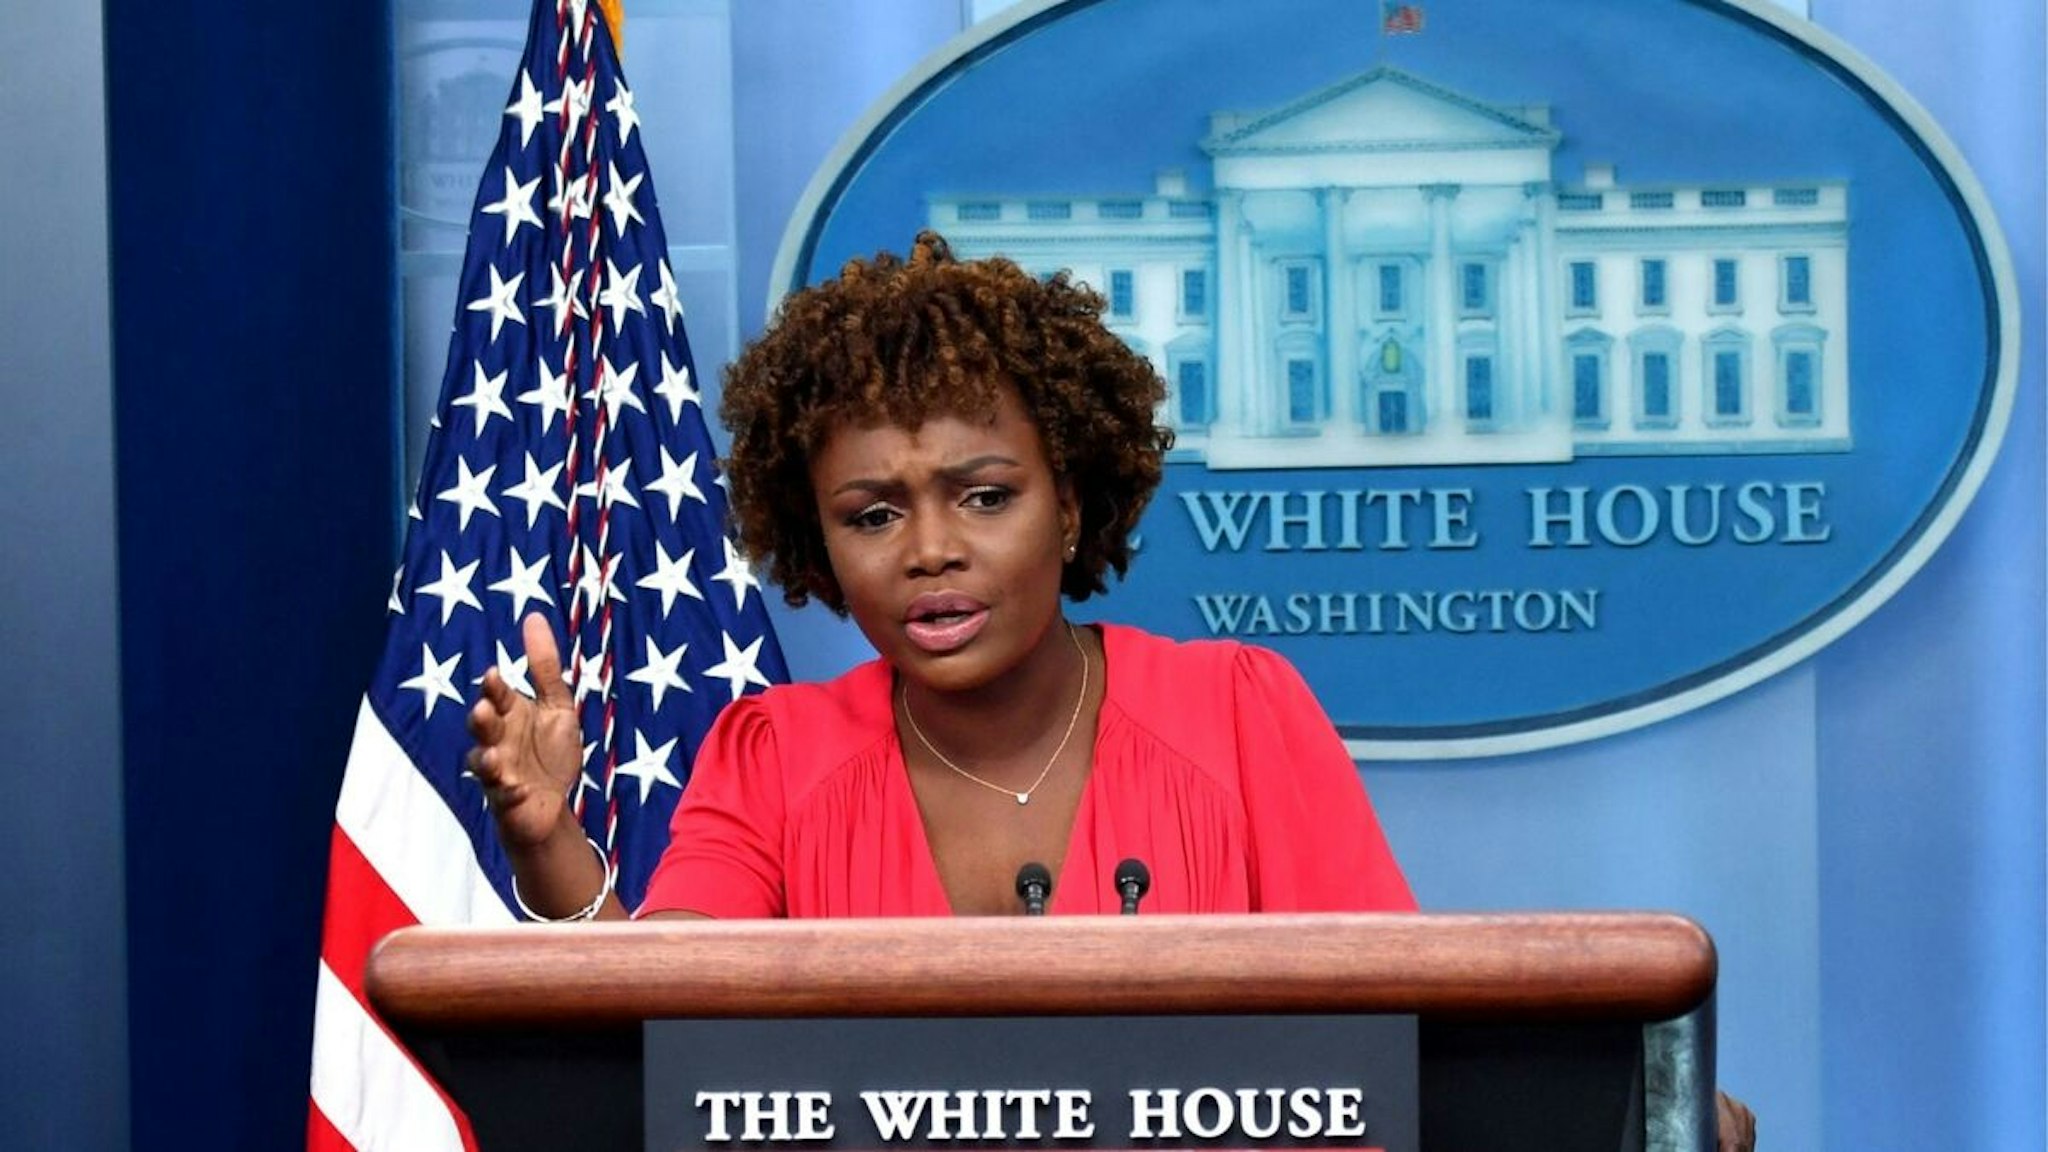 New White House Press Secretary Karine Jean-Pierre speaks to reporters in the James S Brady Press Briefing Room of the White House in Washington, DC, on May 16, 2022.